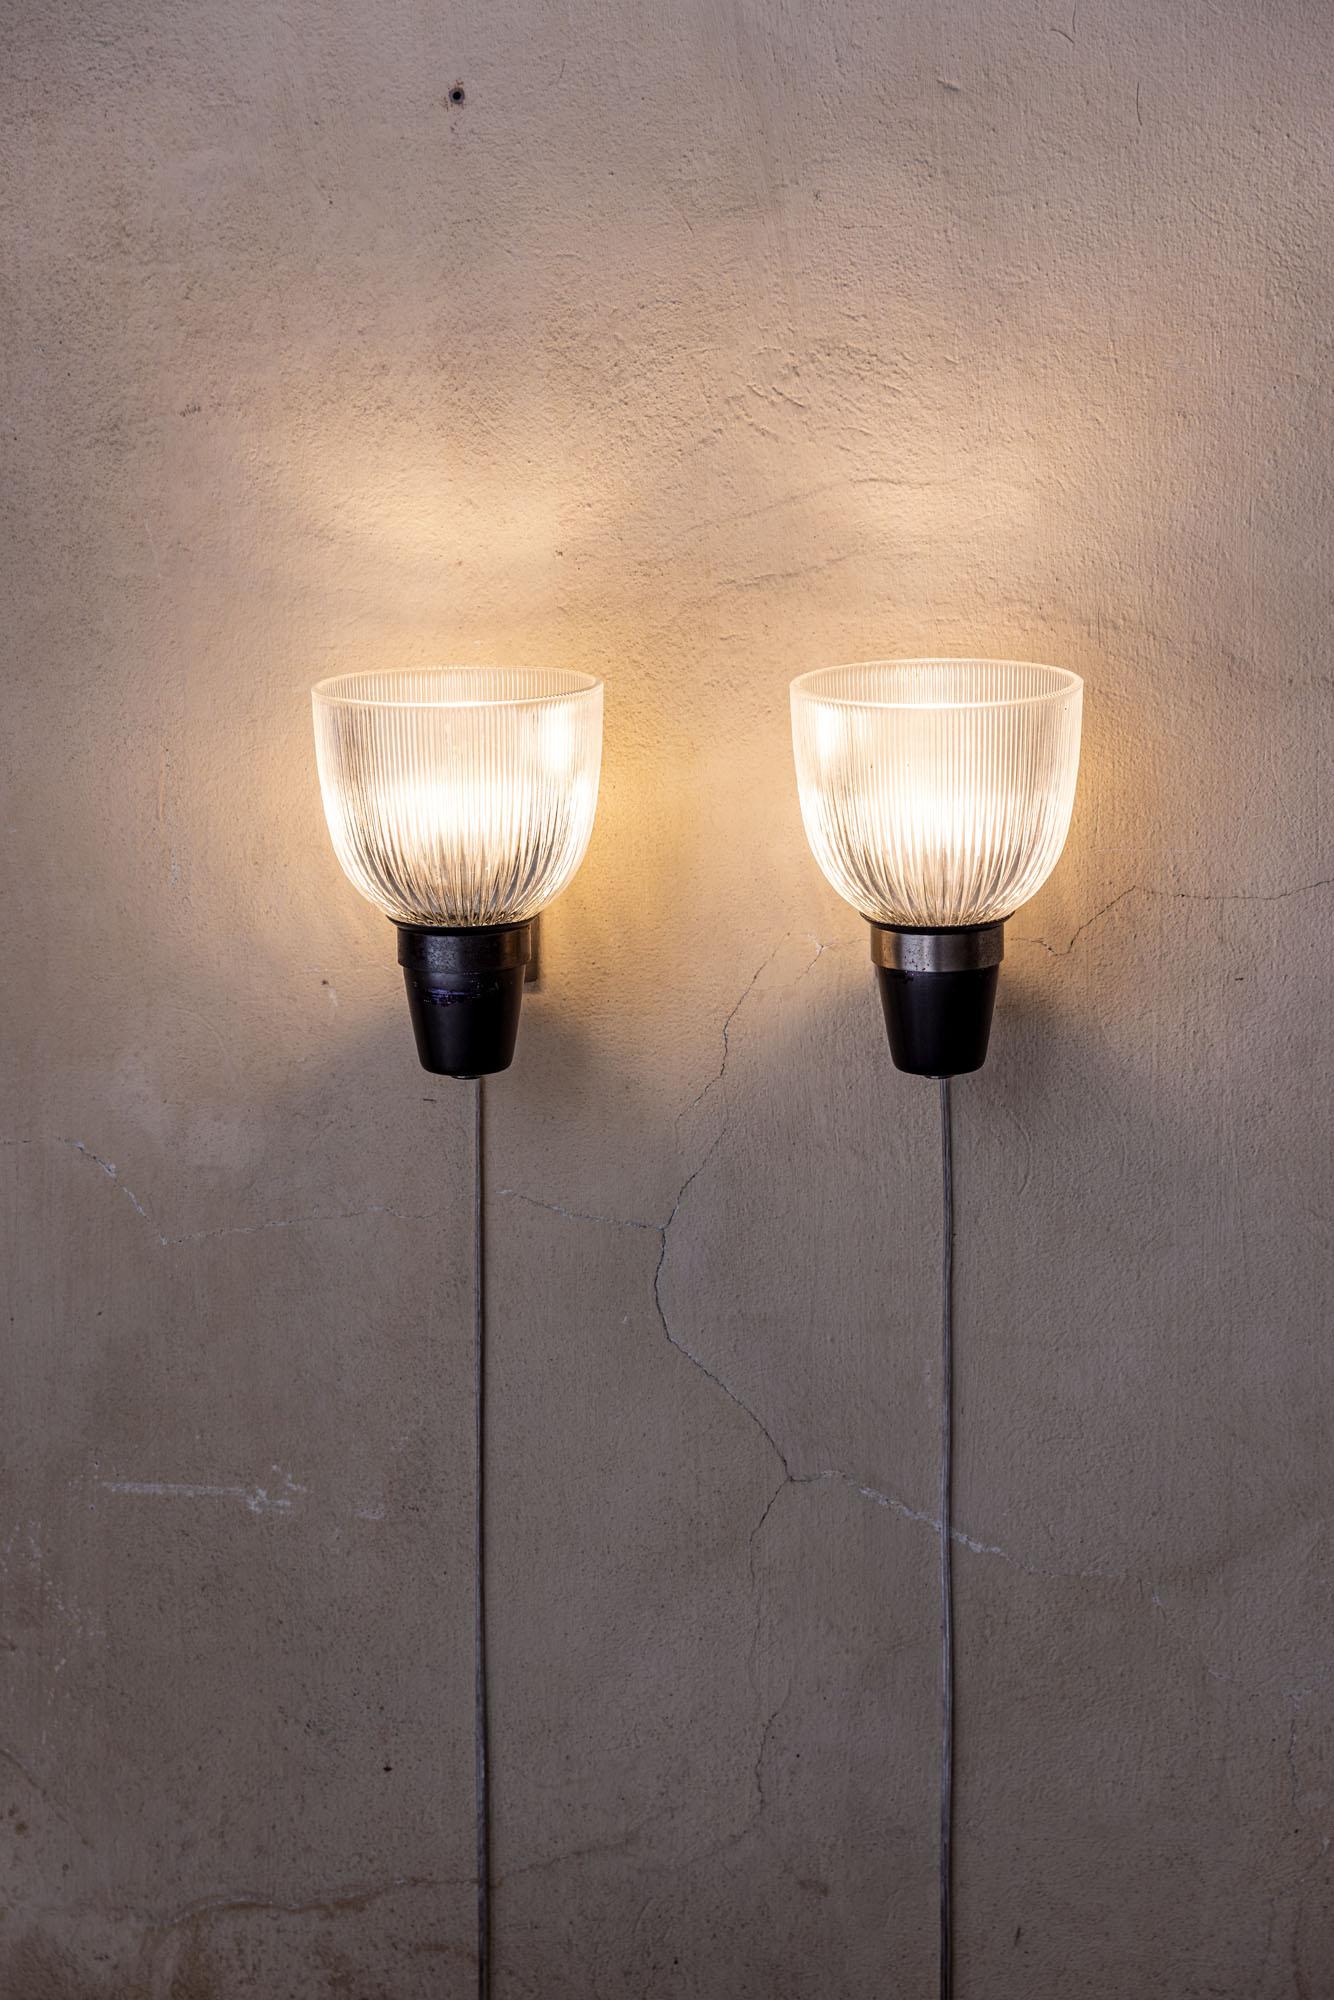 Midcentury Ignazio Gardella wall lamps Mod. Lp5 for Azucena, Italy 1950s For Sale 10